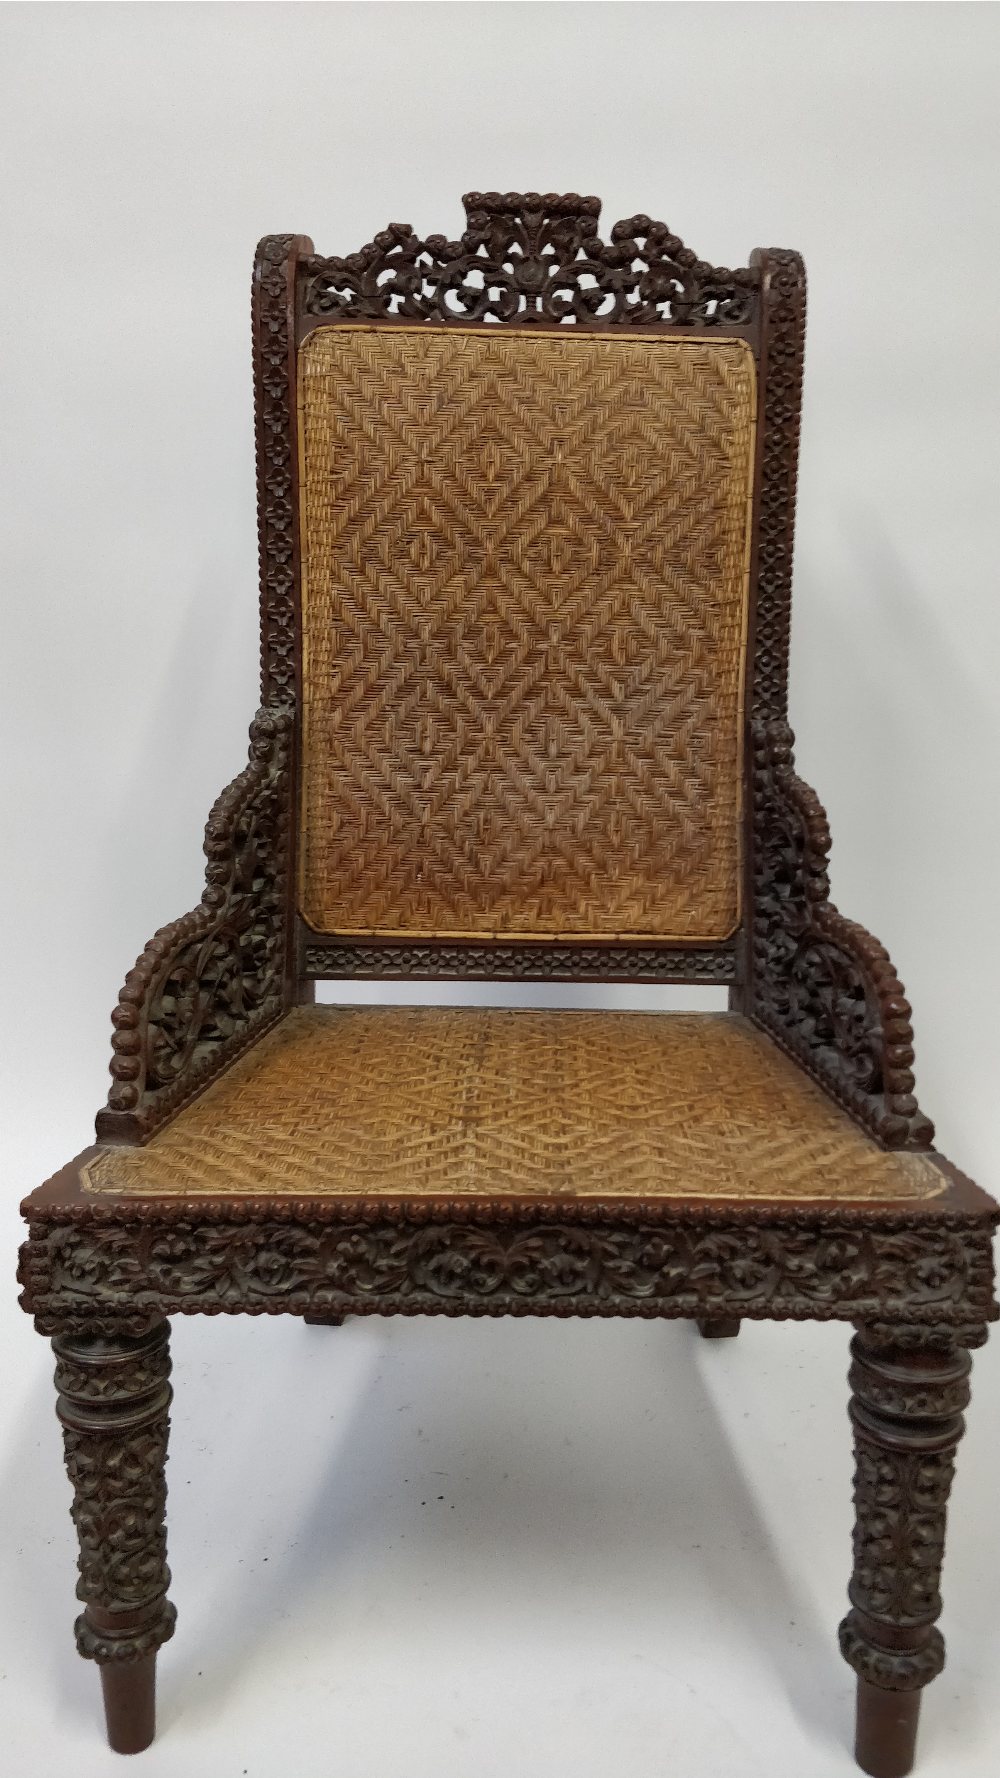 A 19th century Anglo Indian carved hardwood chair with a wicker seat and back